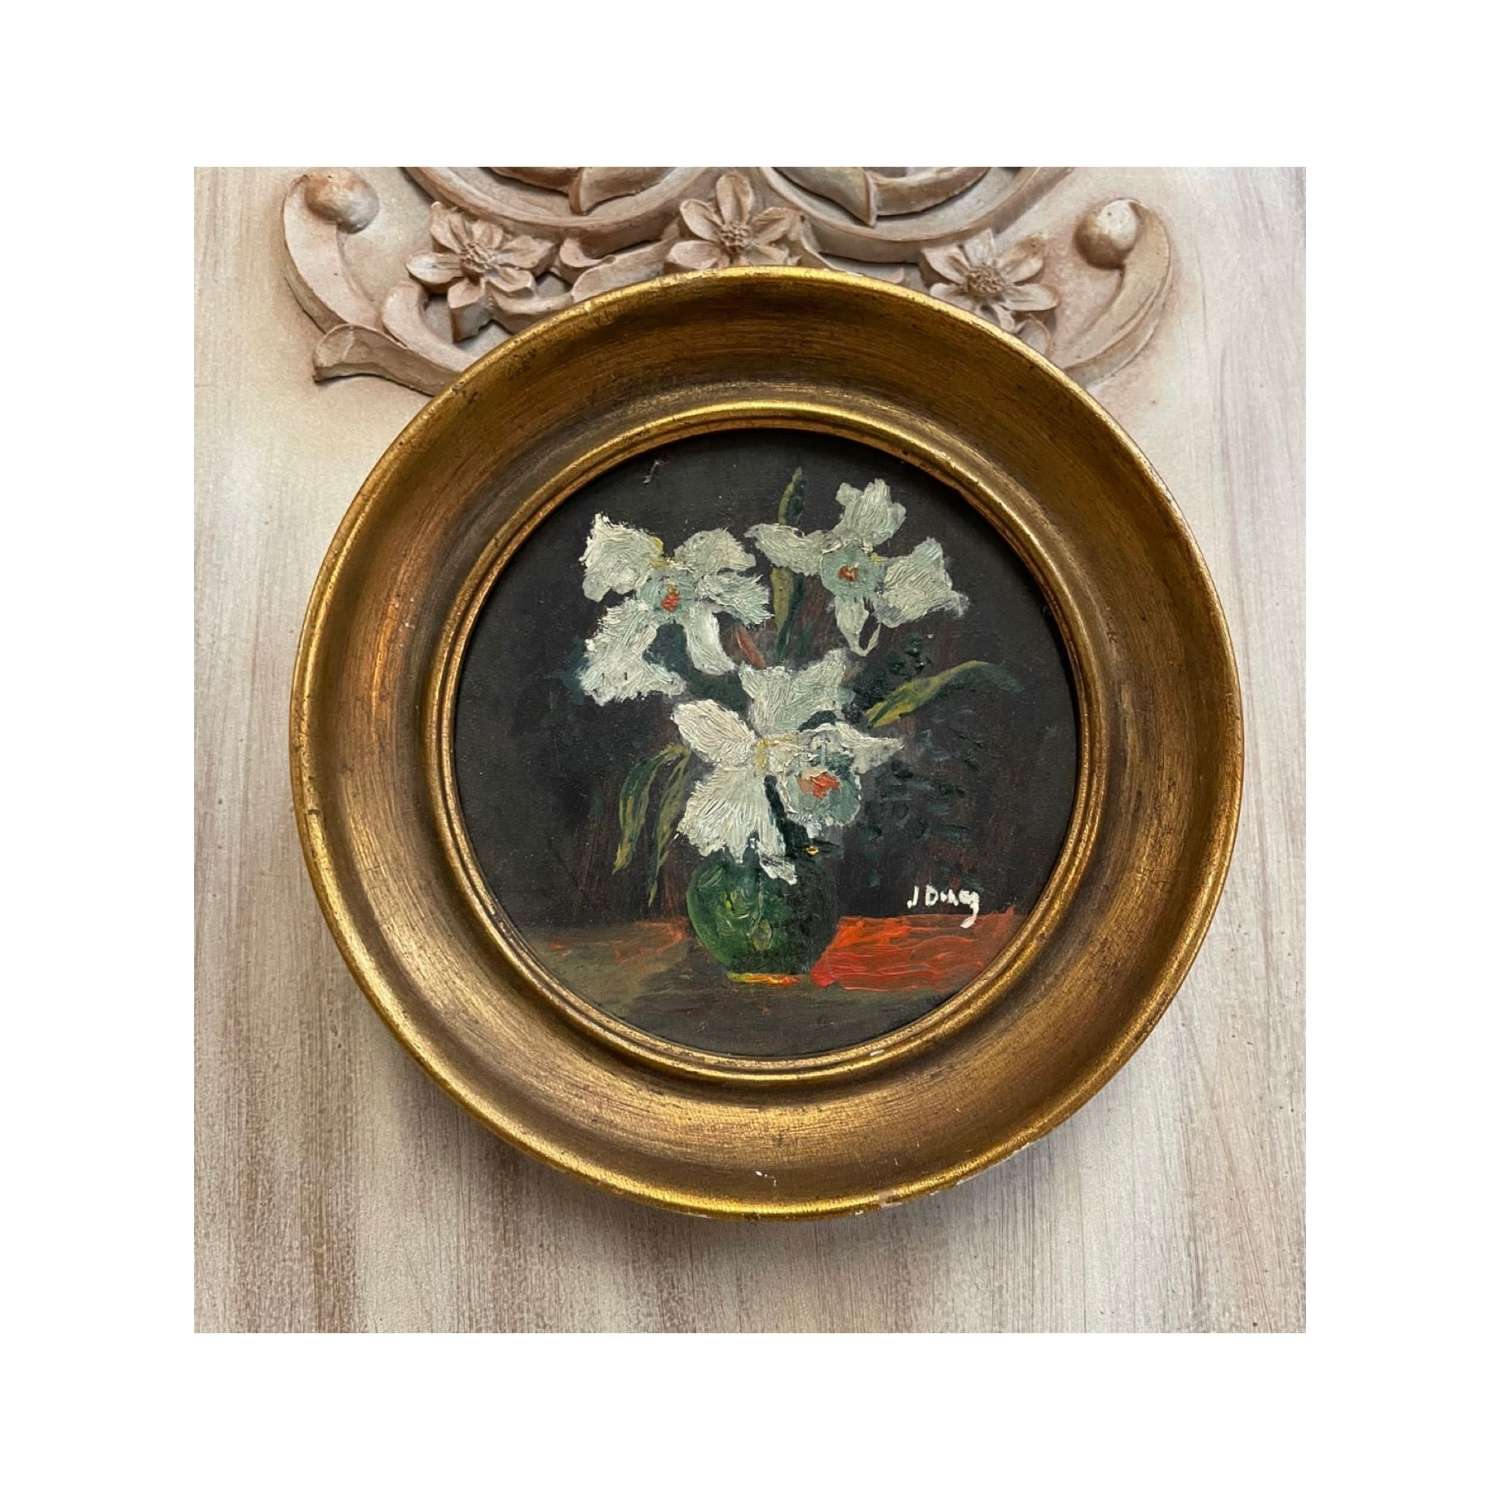 Signed miniature antique painting c early 1900’s